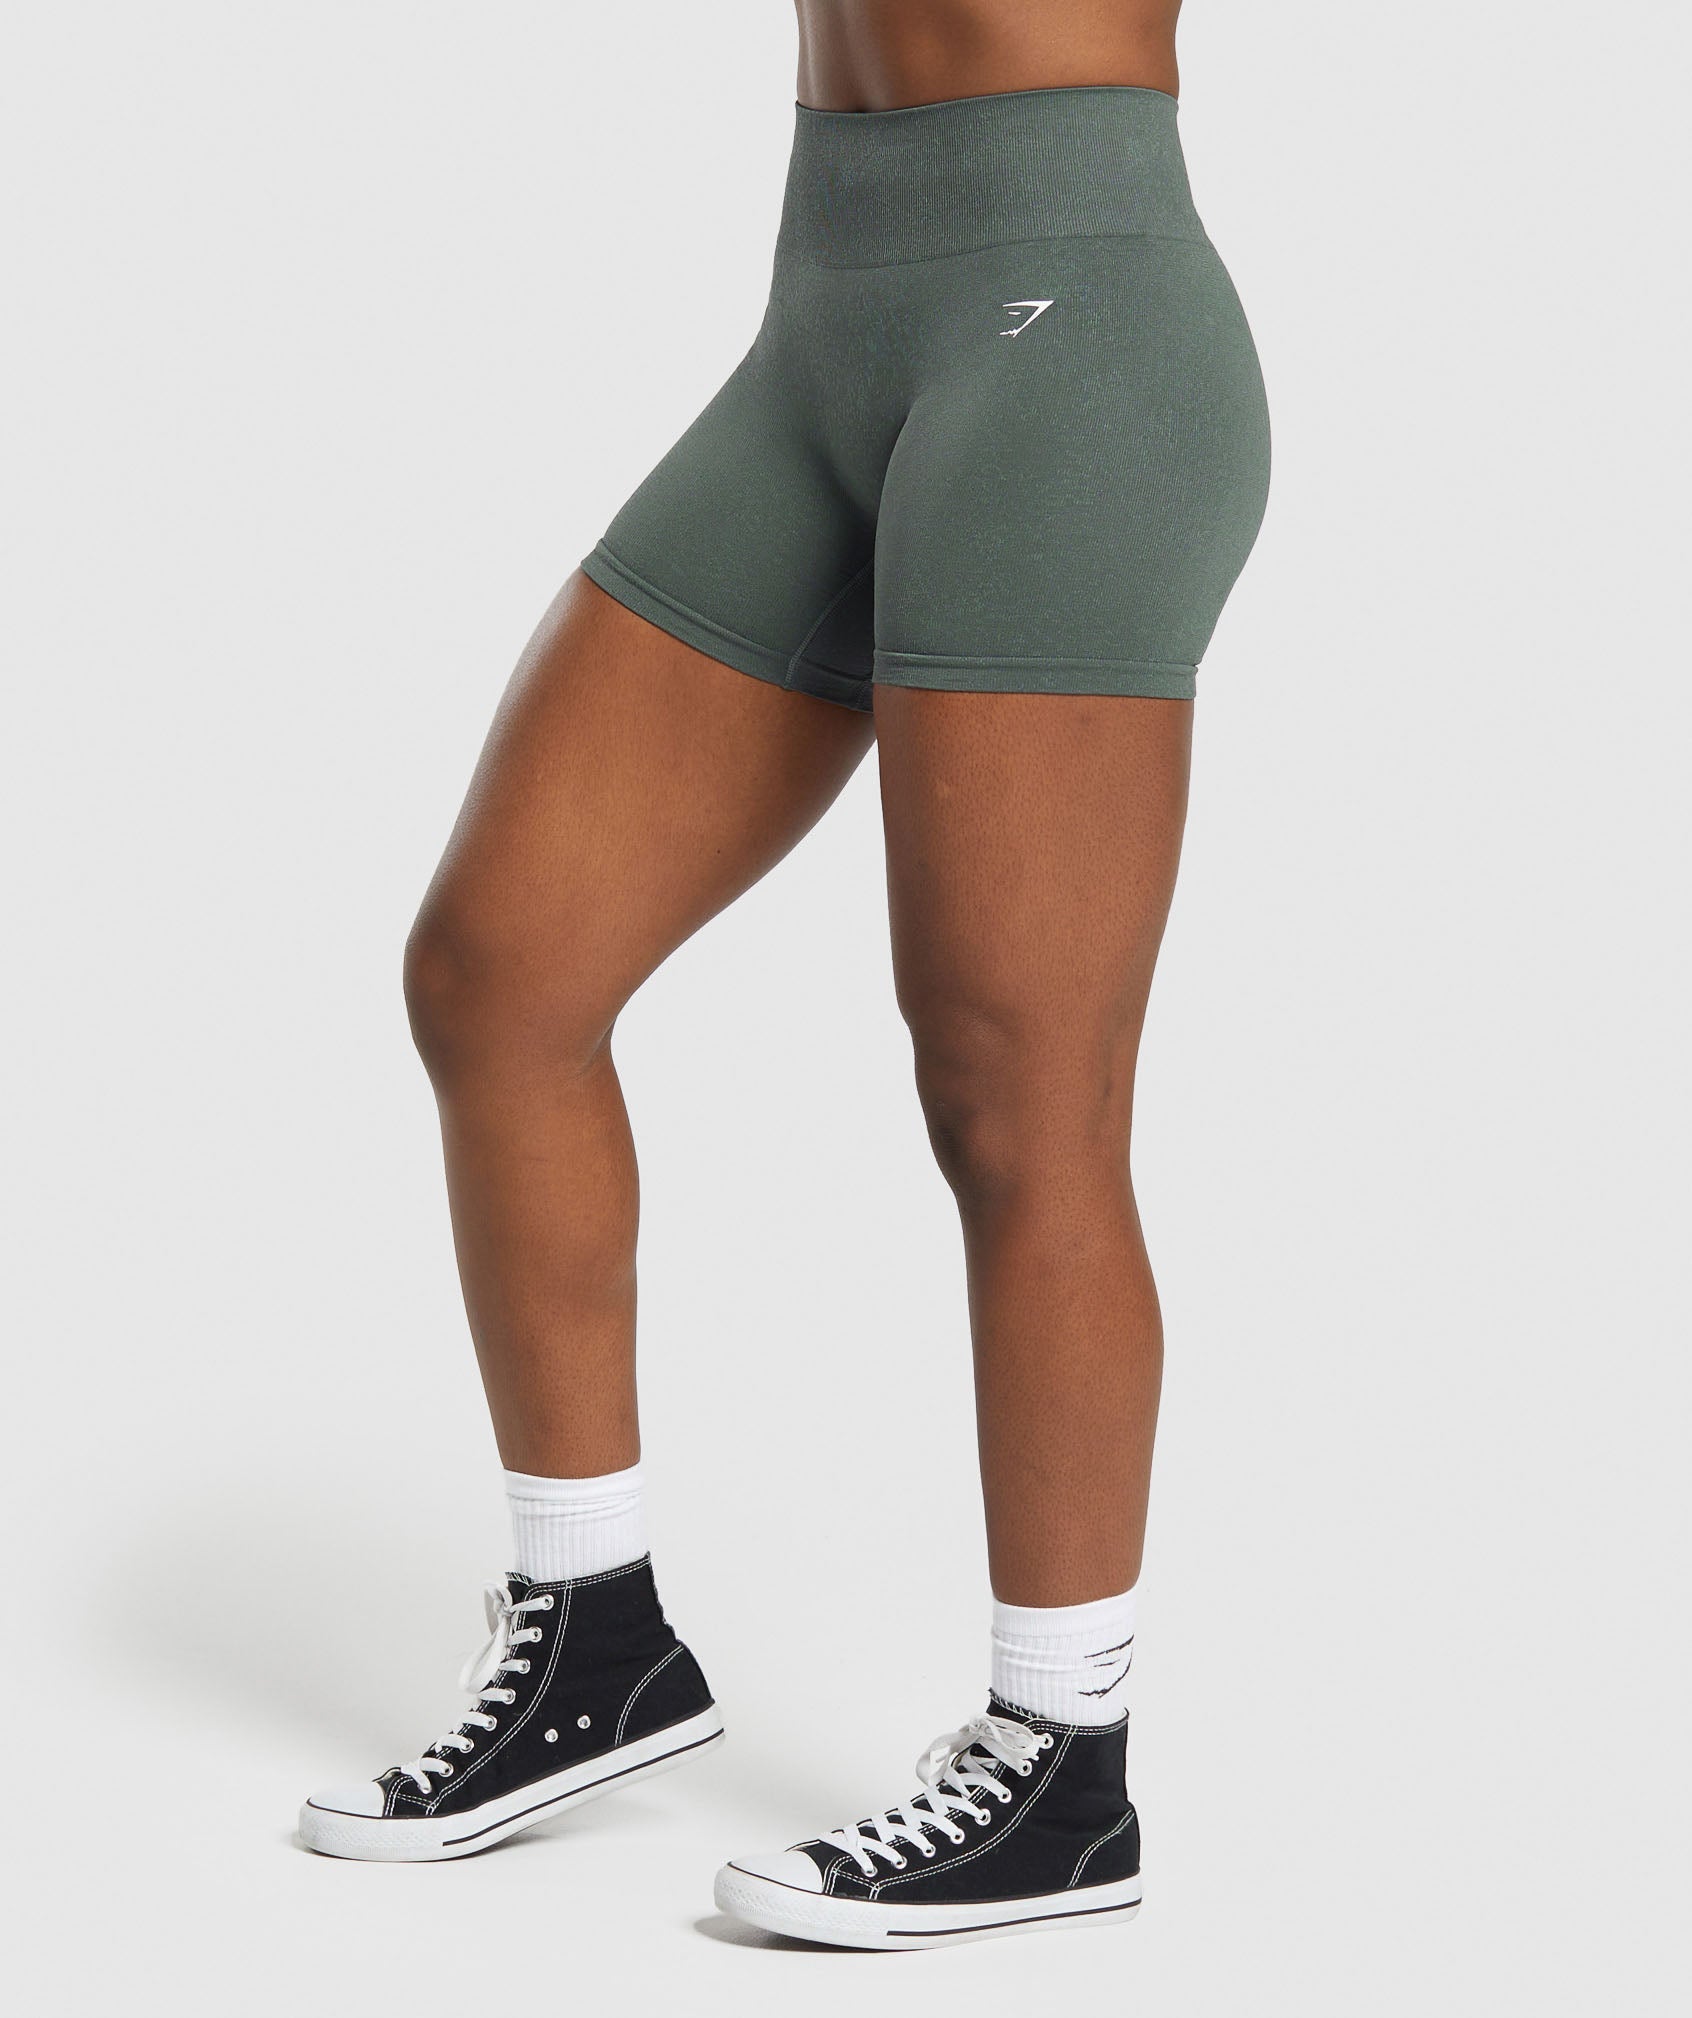 Adapt Fleck Seamless Shorts in Slate Teal/Cargo Teal - view 3